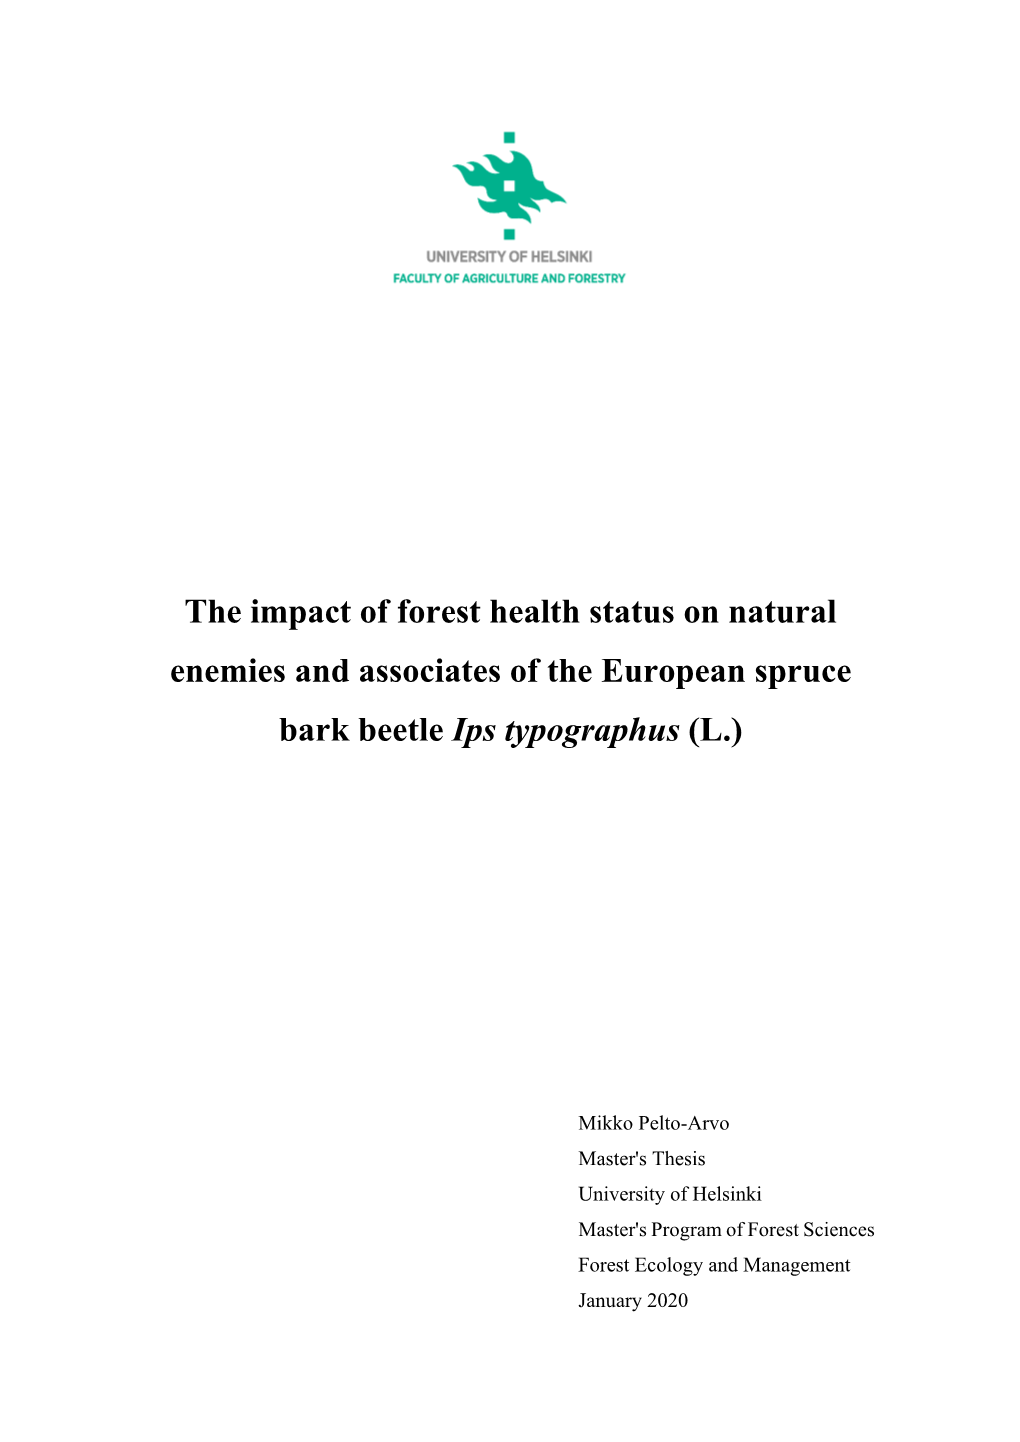 The Impact of Forest Health Status on Natural Enemies and Associates of the European Spruce Bark Beetle Ips Typographus (L.)